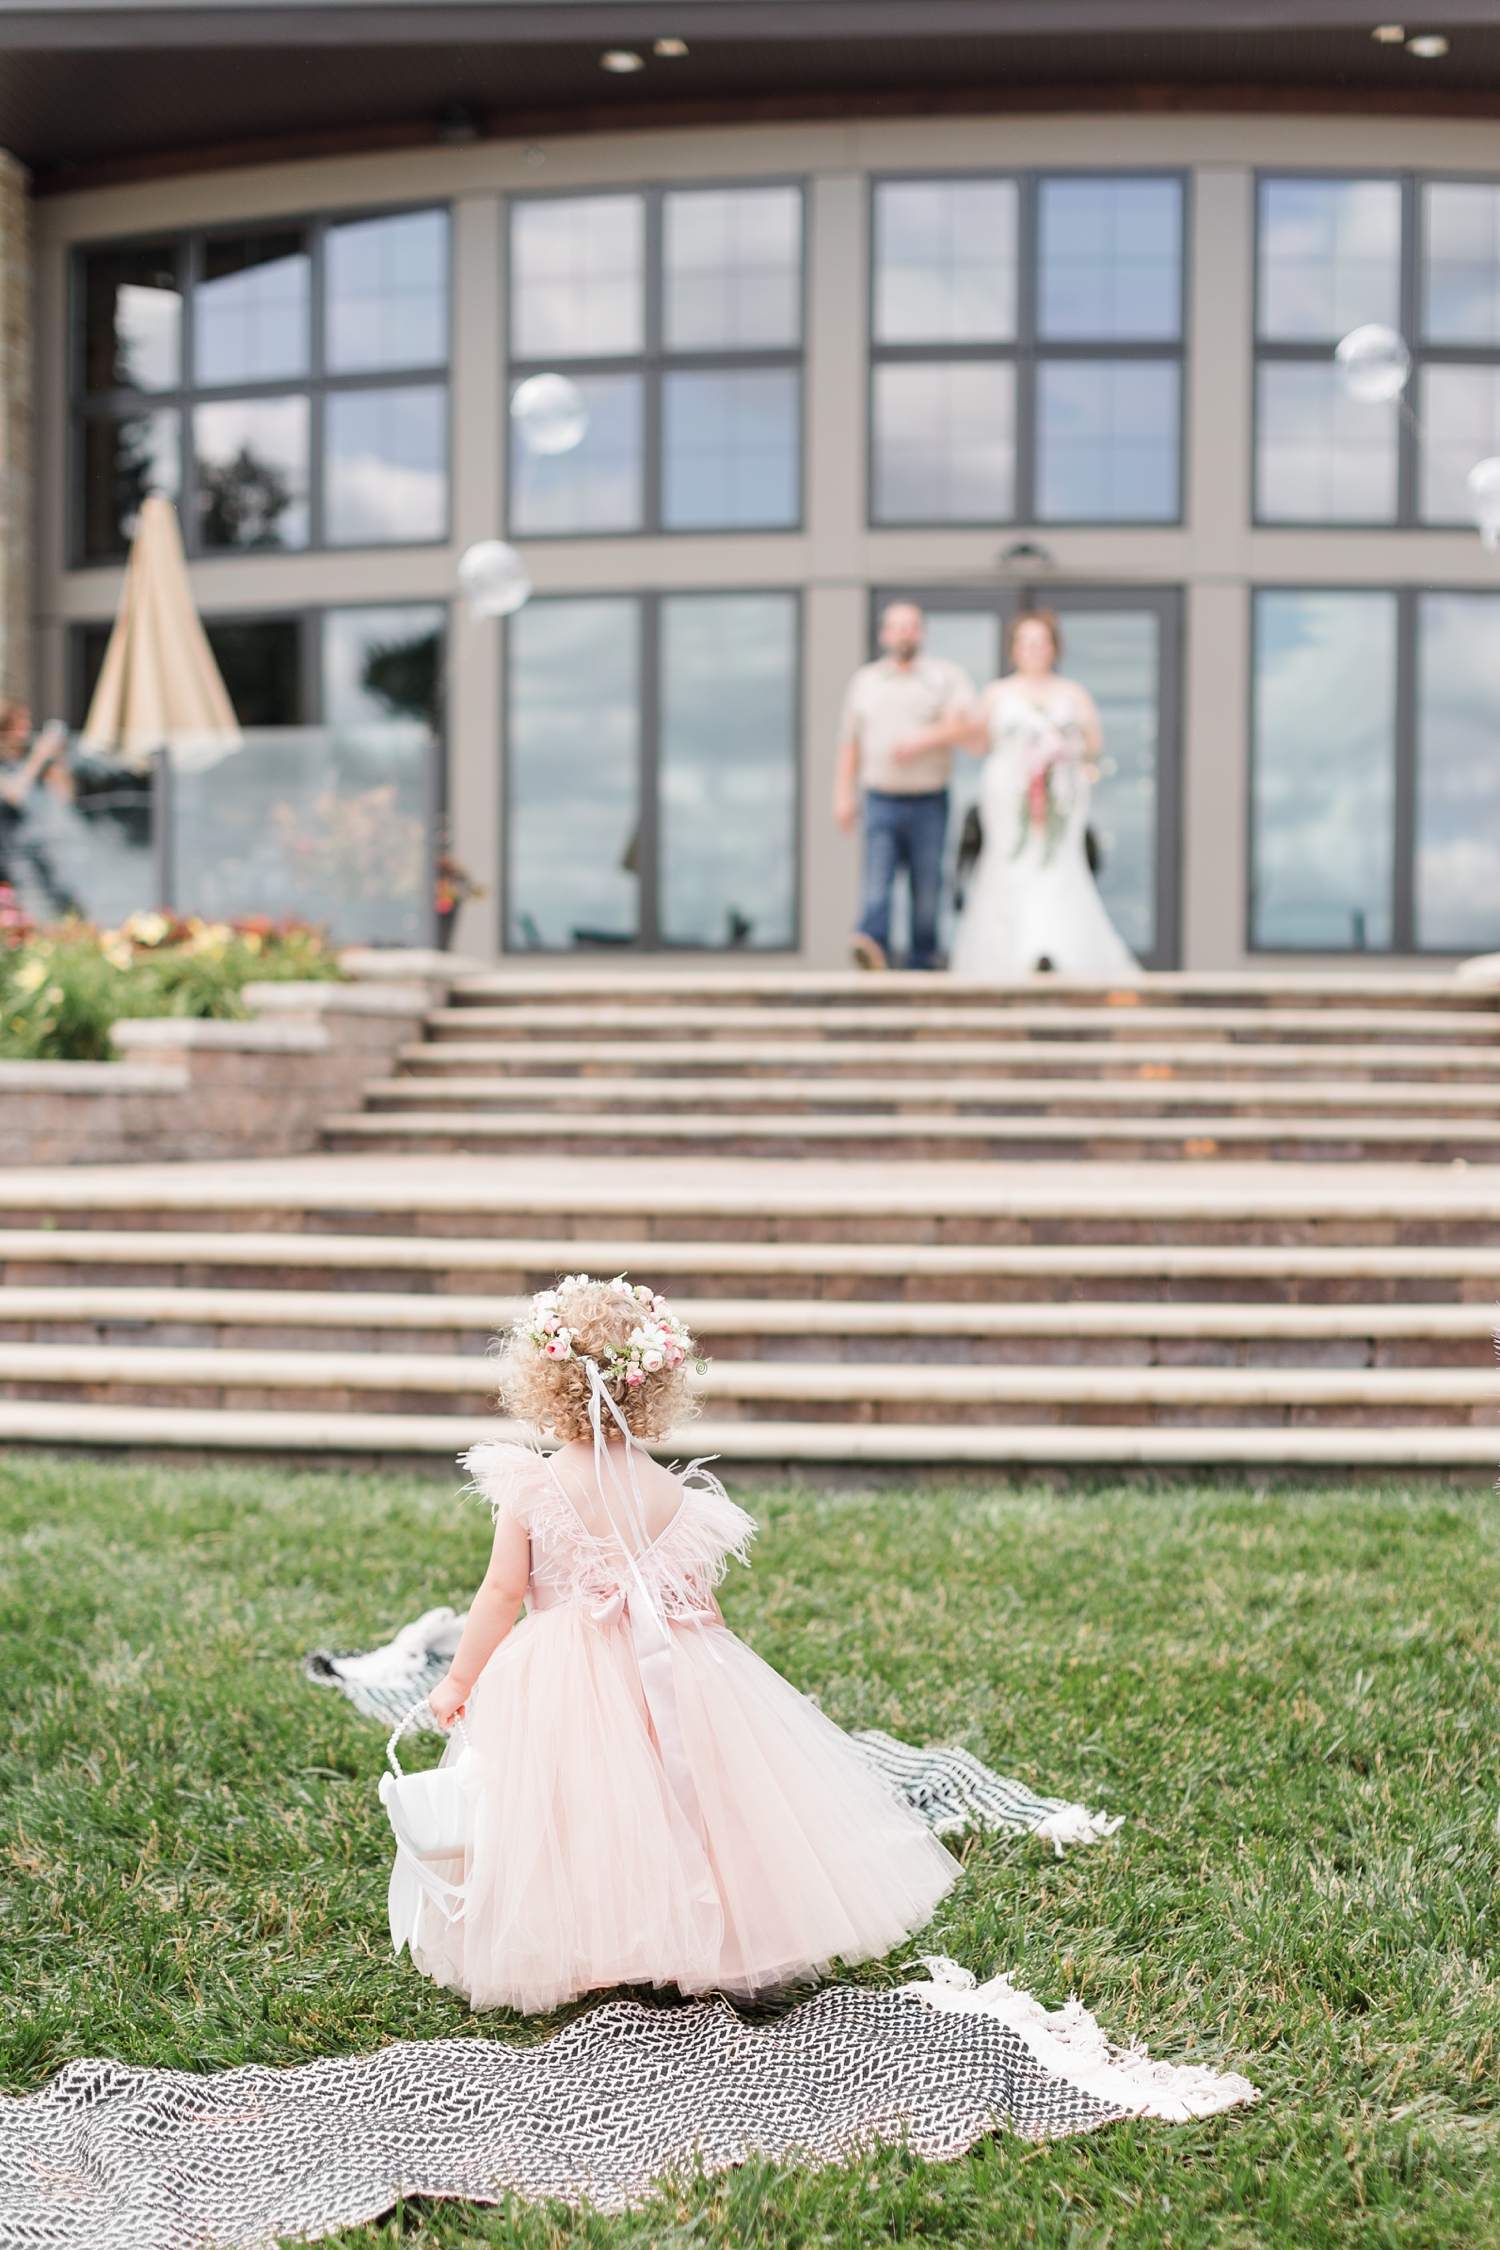 A young flower girl dressed in blush and surrounded by bubbles, stands at the end of the aisle and watches as the bride walks down with her father in the background | CB Studio